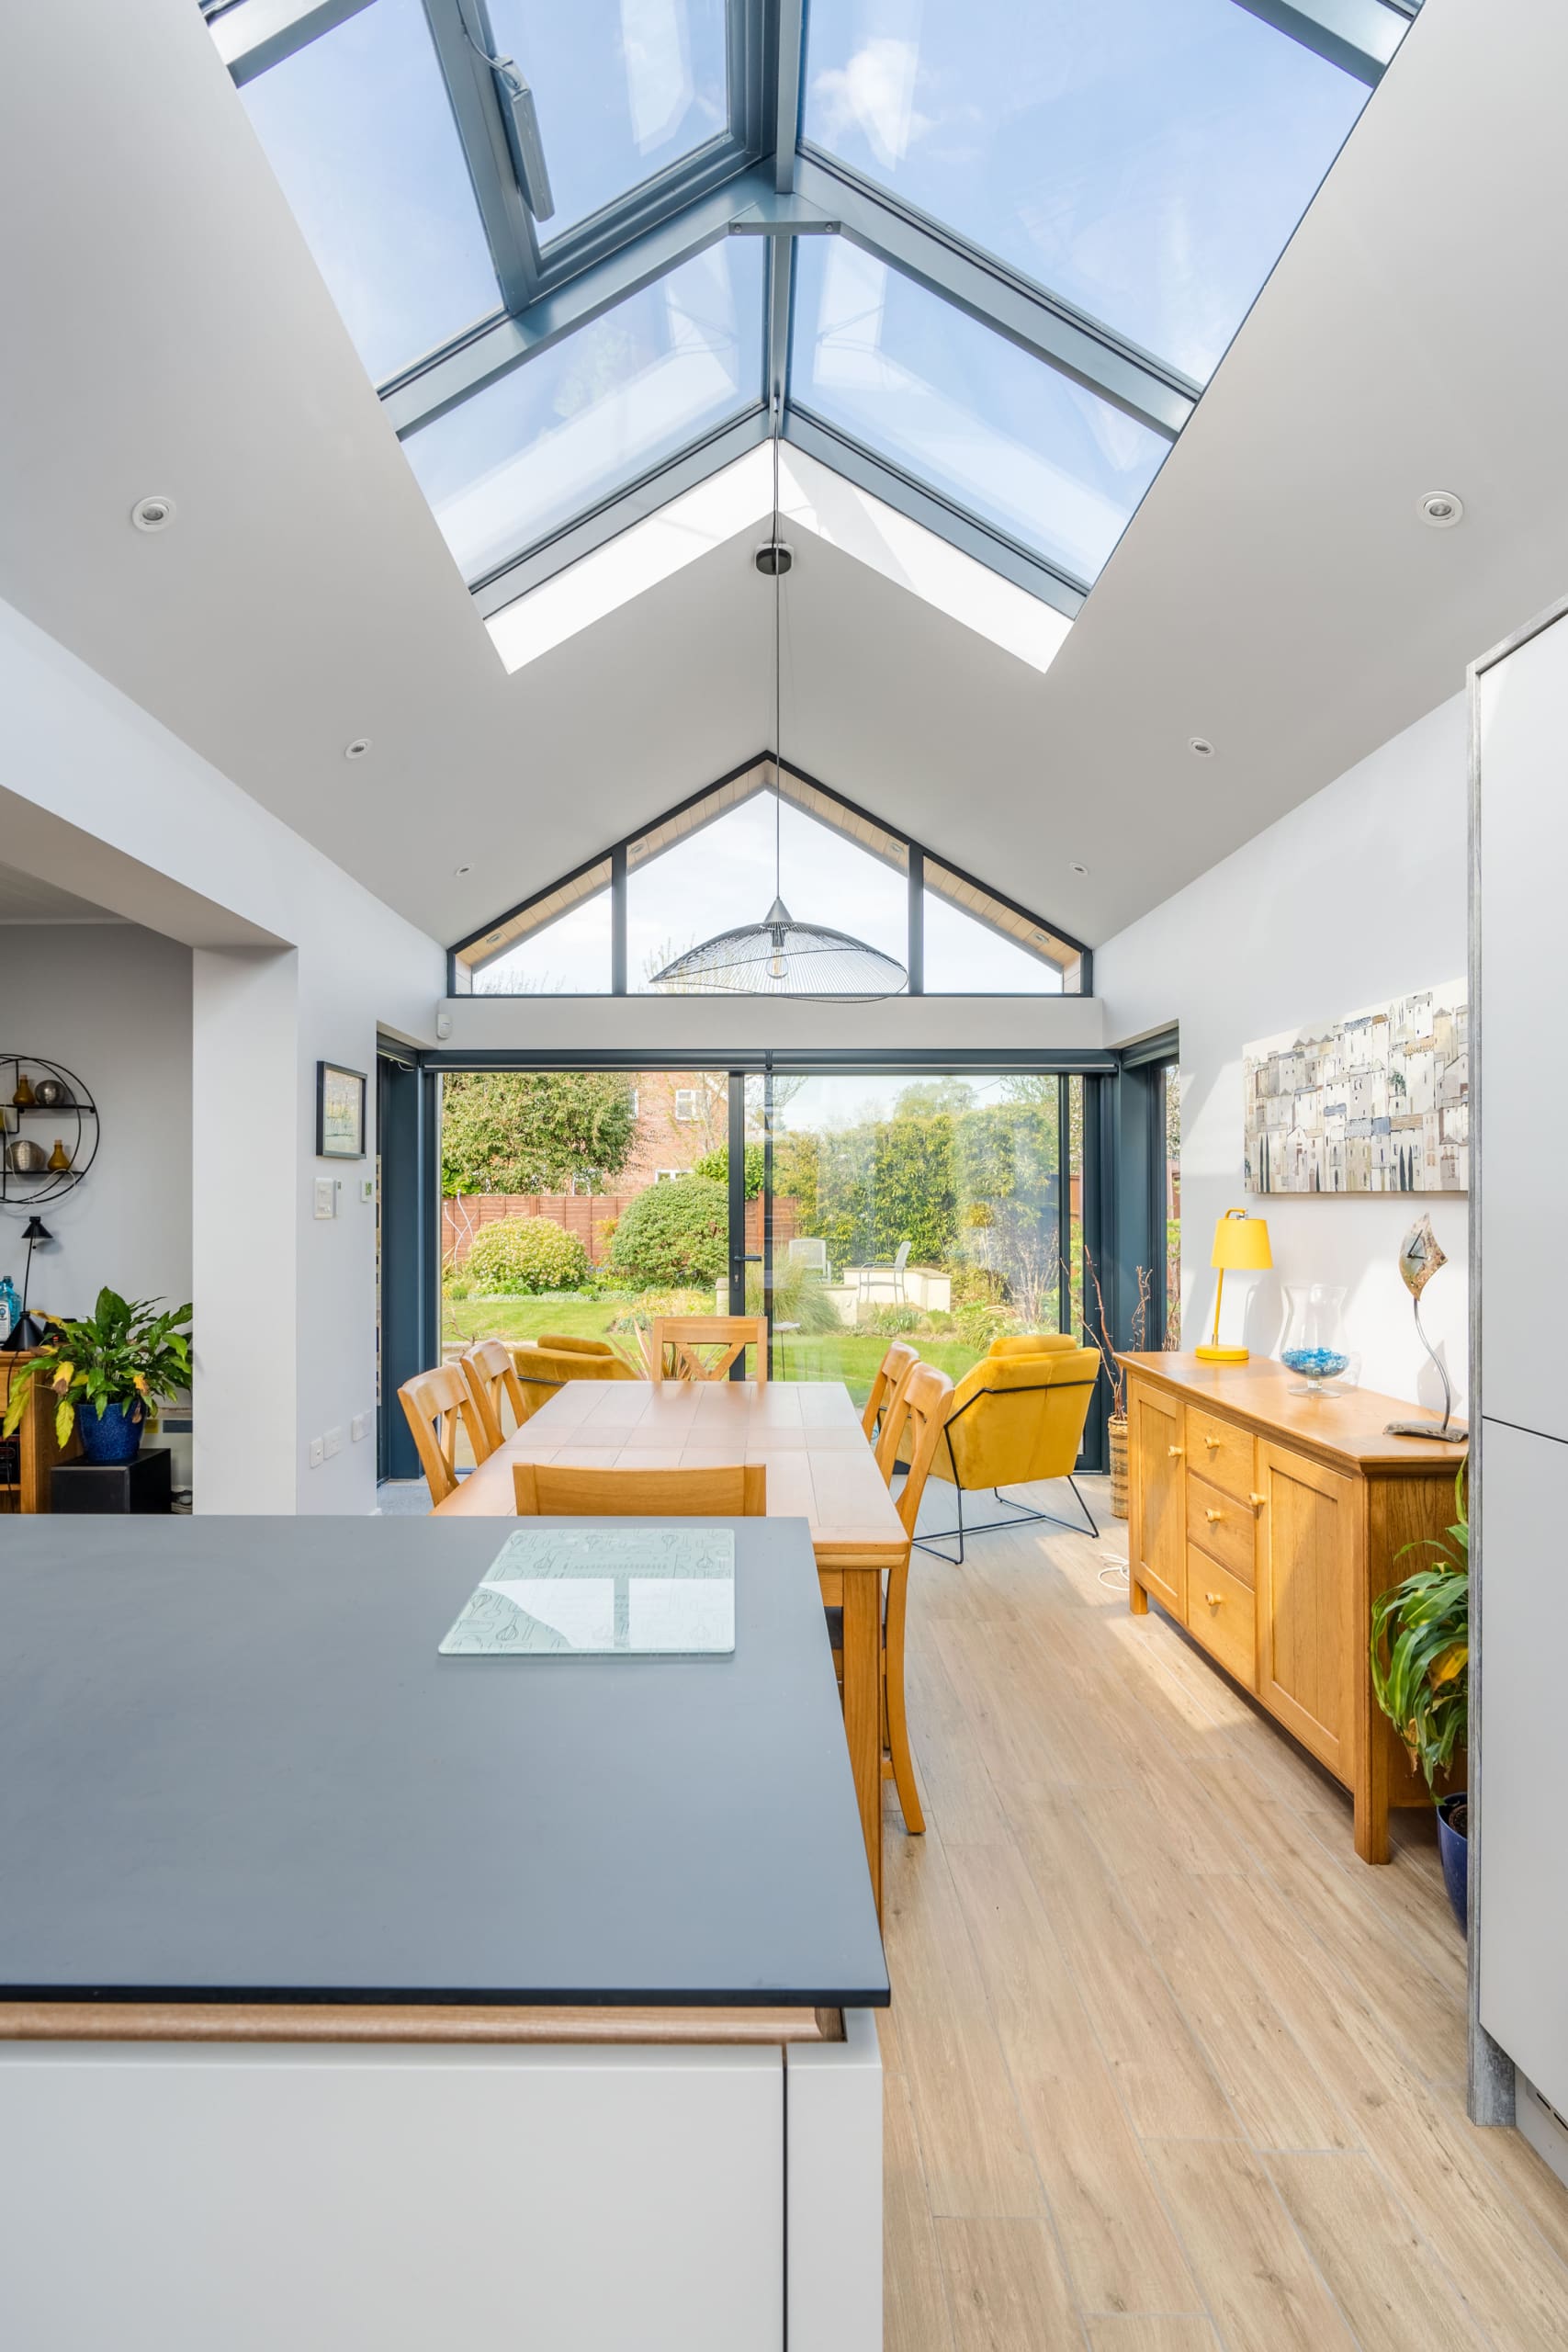 Interior of a stunning kitchen diner with roof lantern.